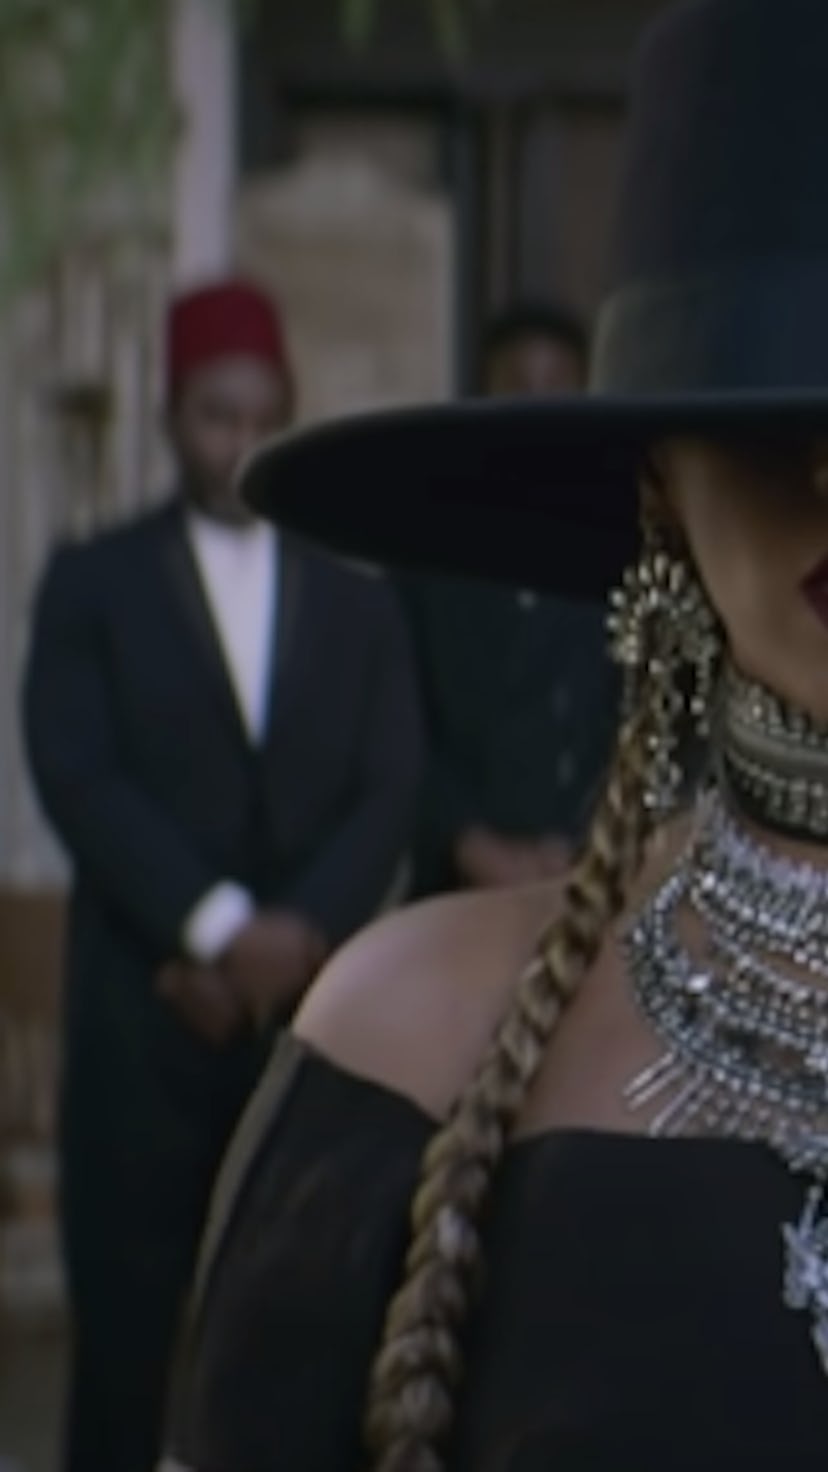 Beyoncé's music video evolution, from early aughts queen to masterful storyteller.